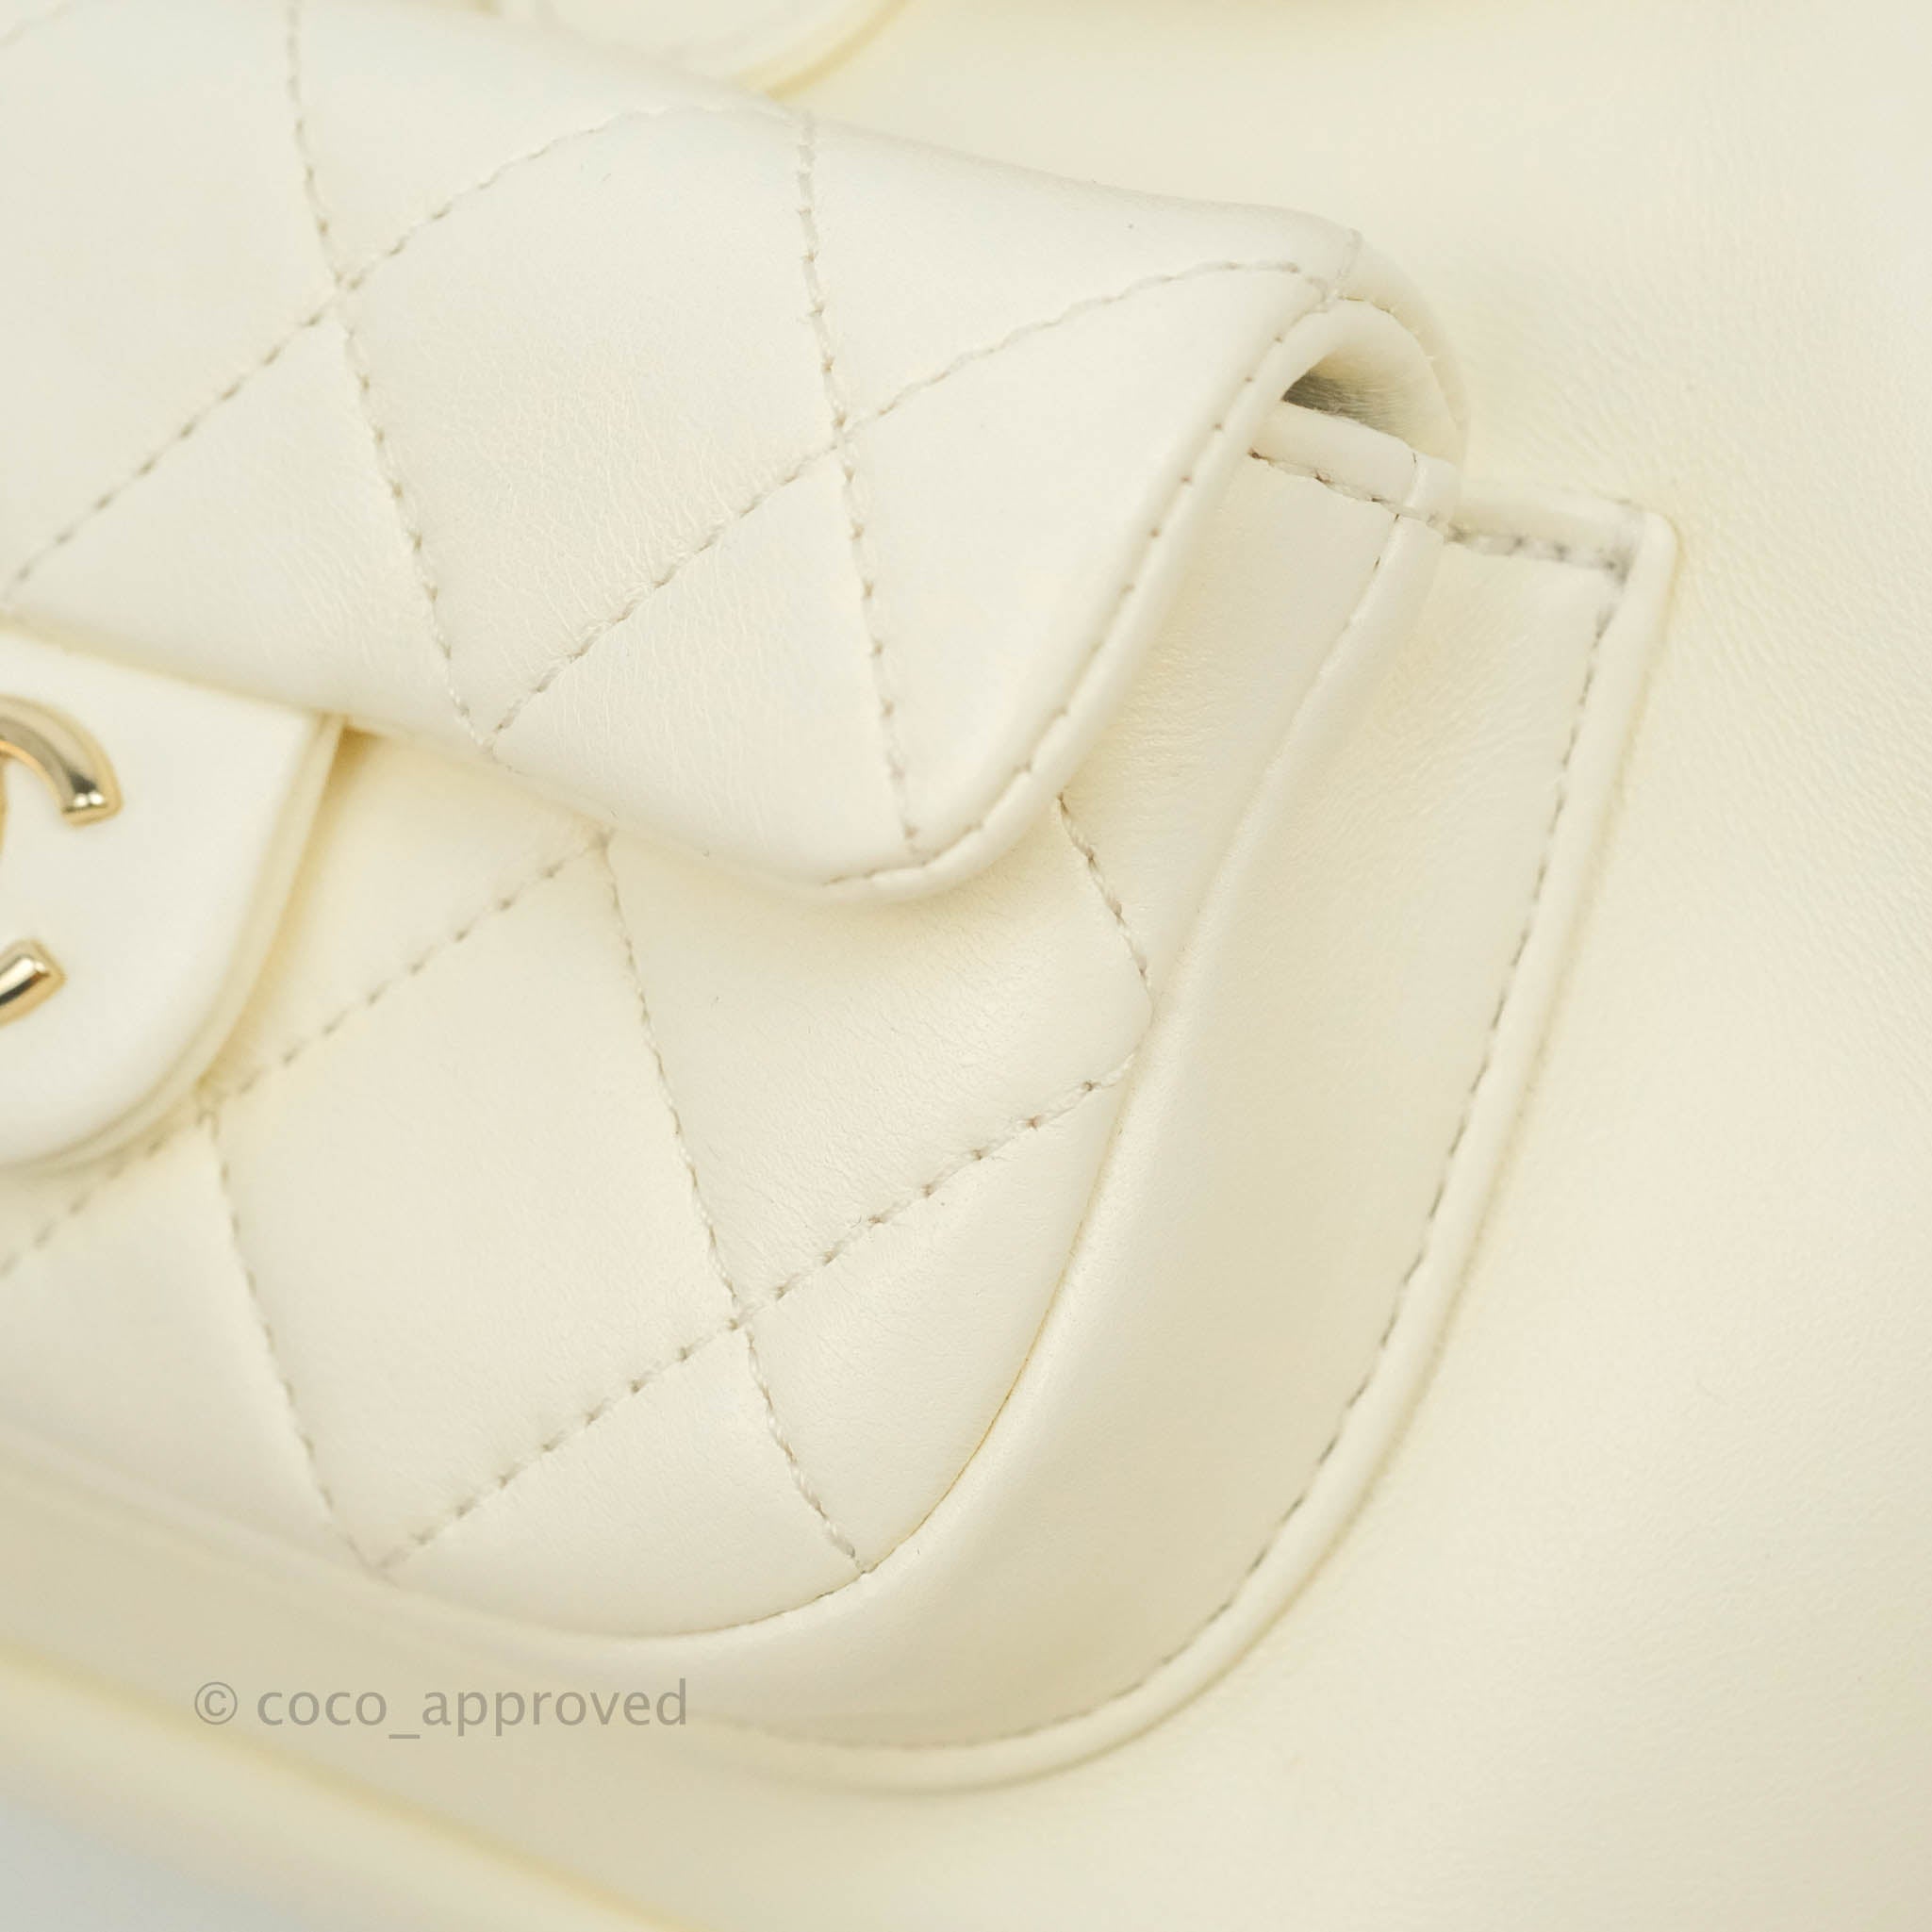 Chanel CAVIAR AFFINITY BACKPACK replica